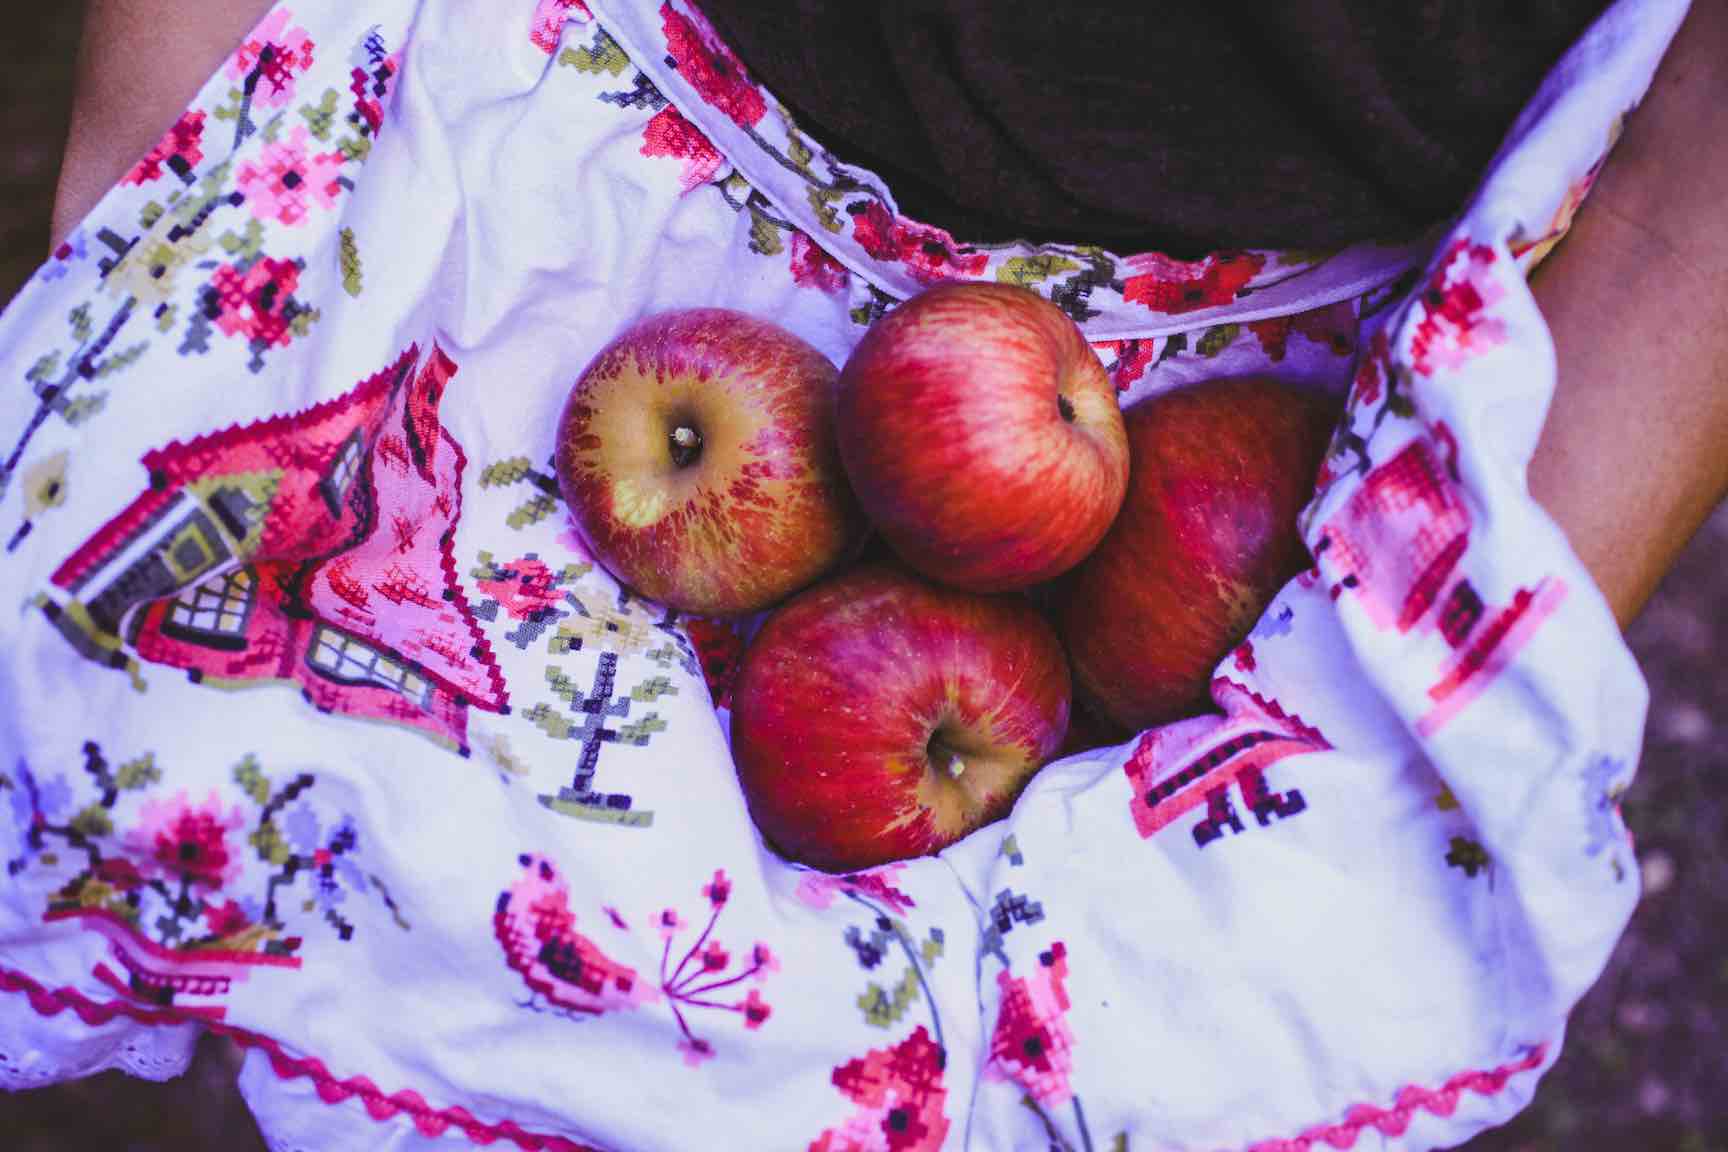 Apples in an apron